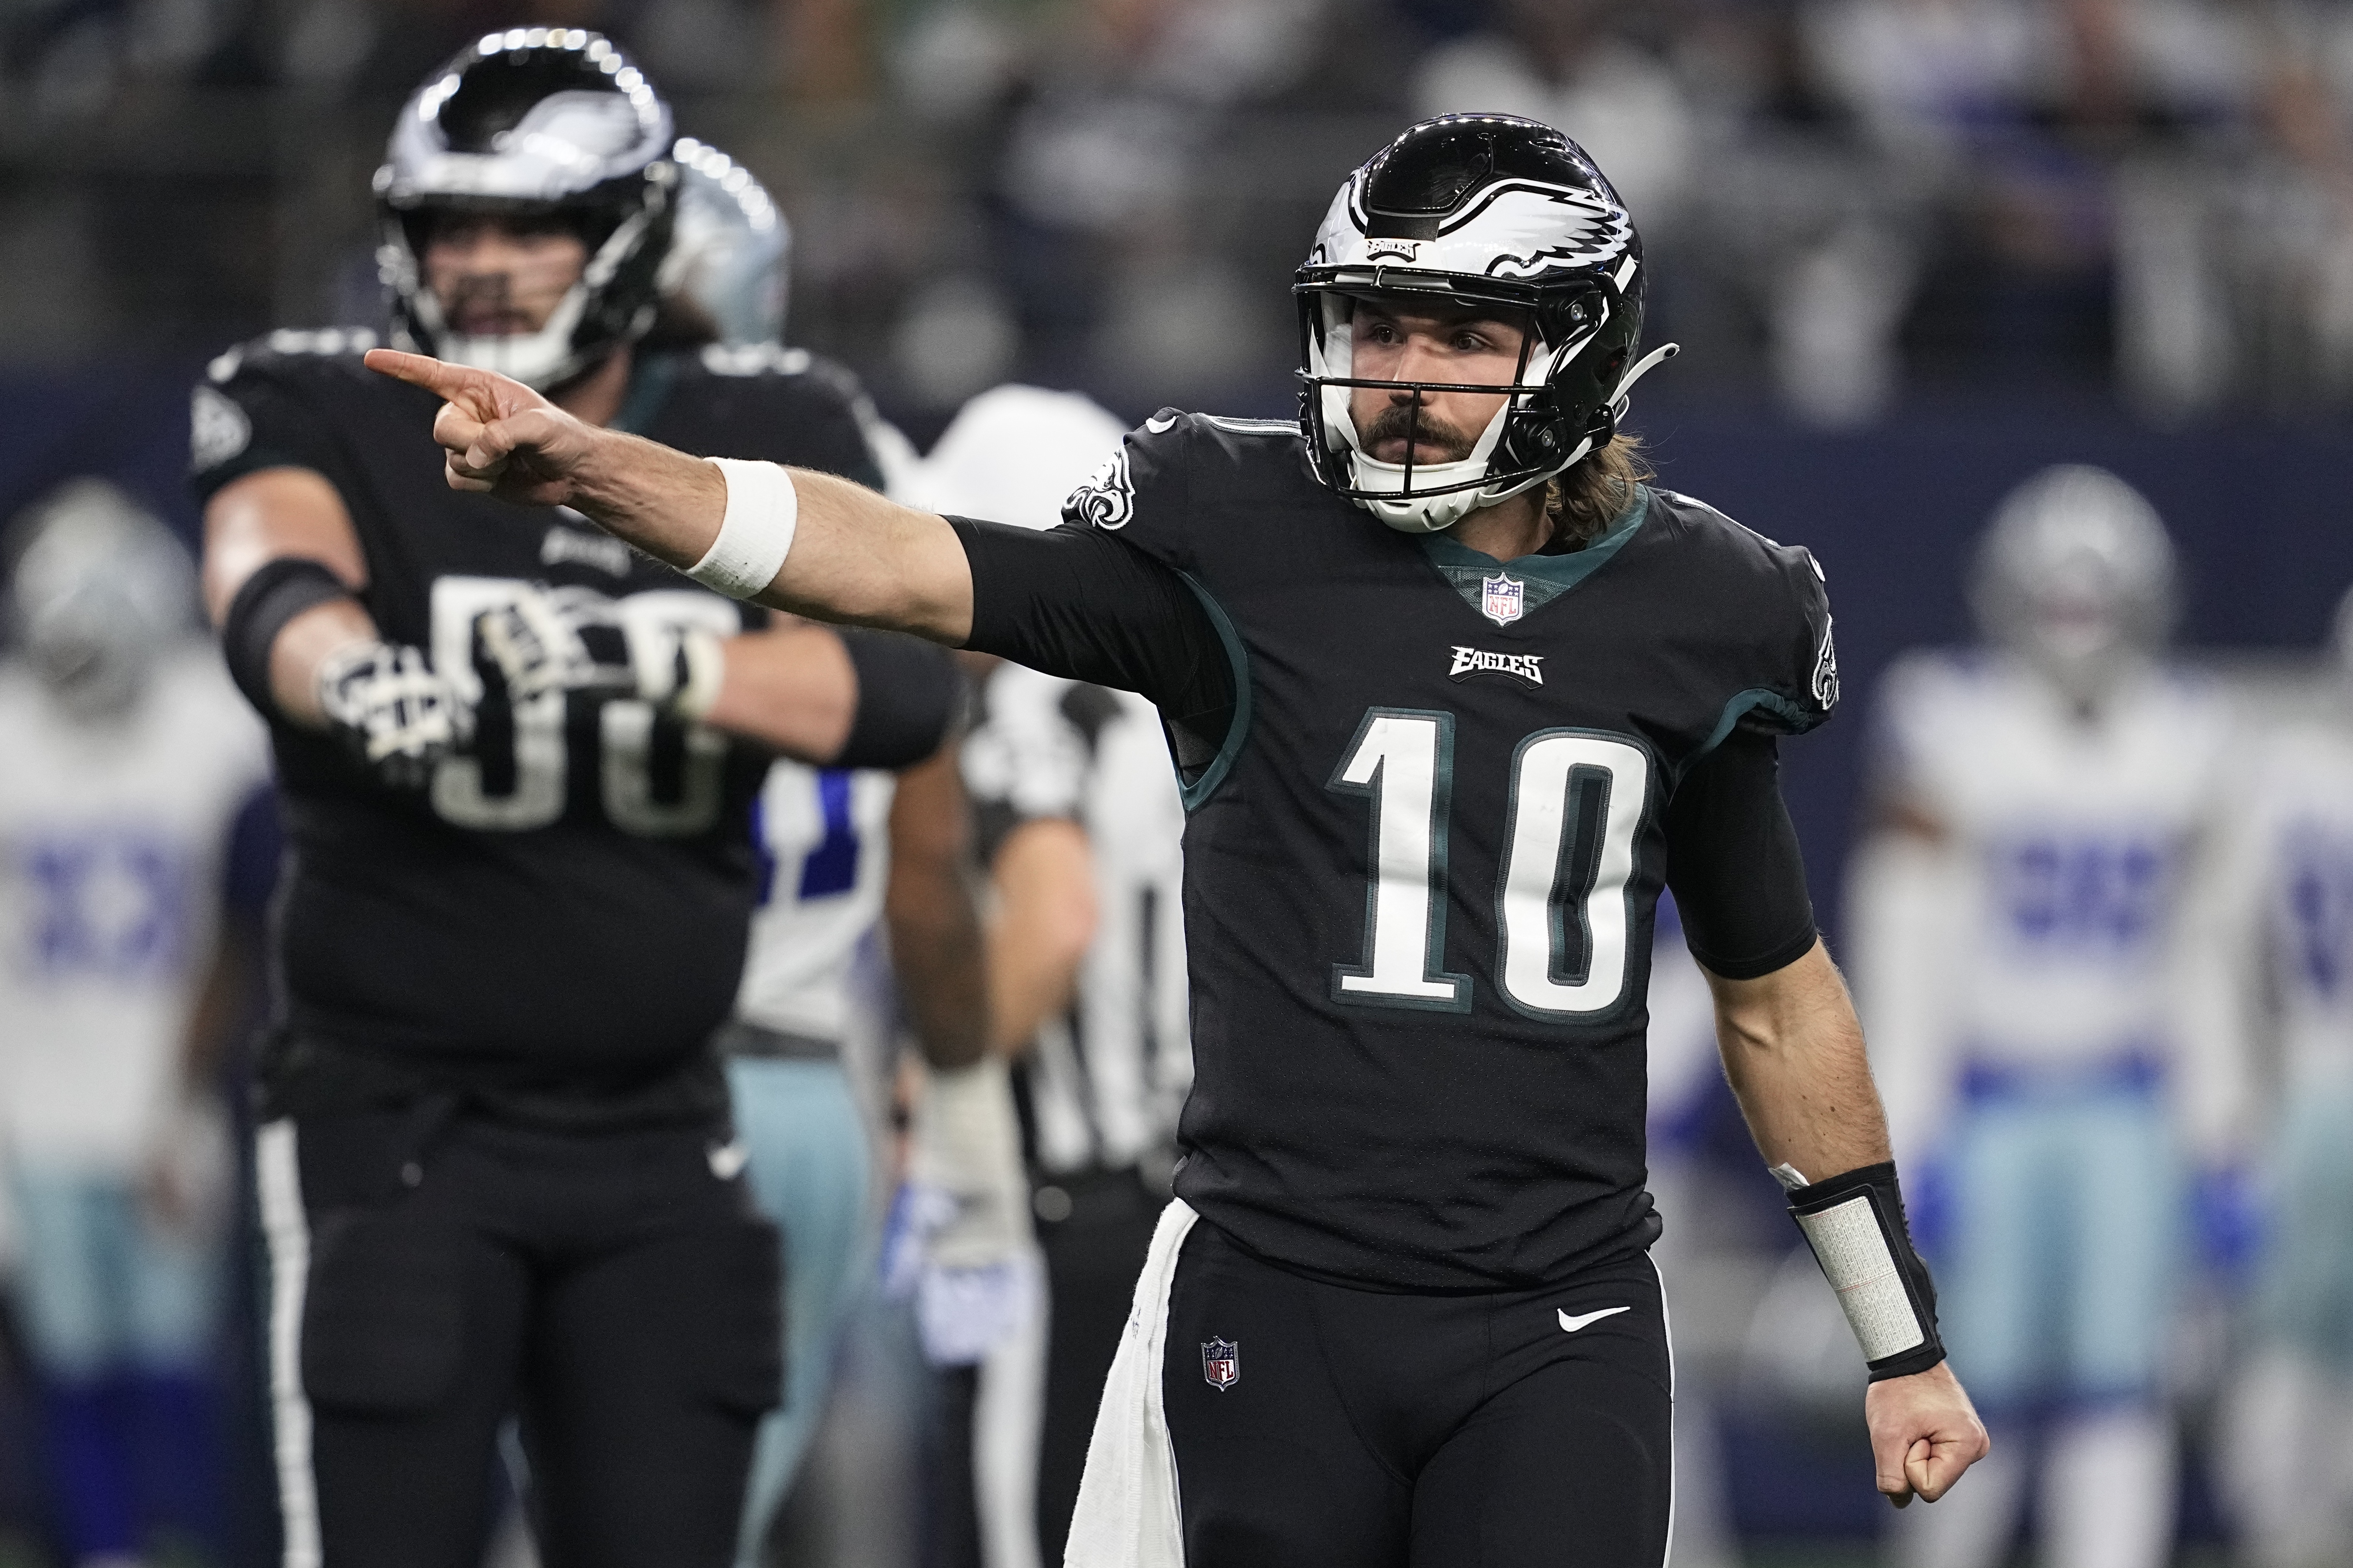 Gardner Minshew solid but turnovers doom Eagles in 40-34 loss to Cowboys